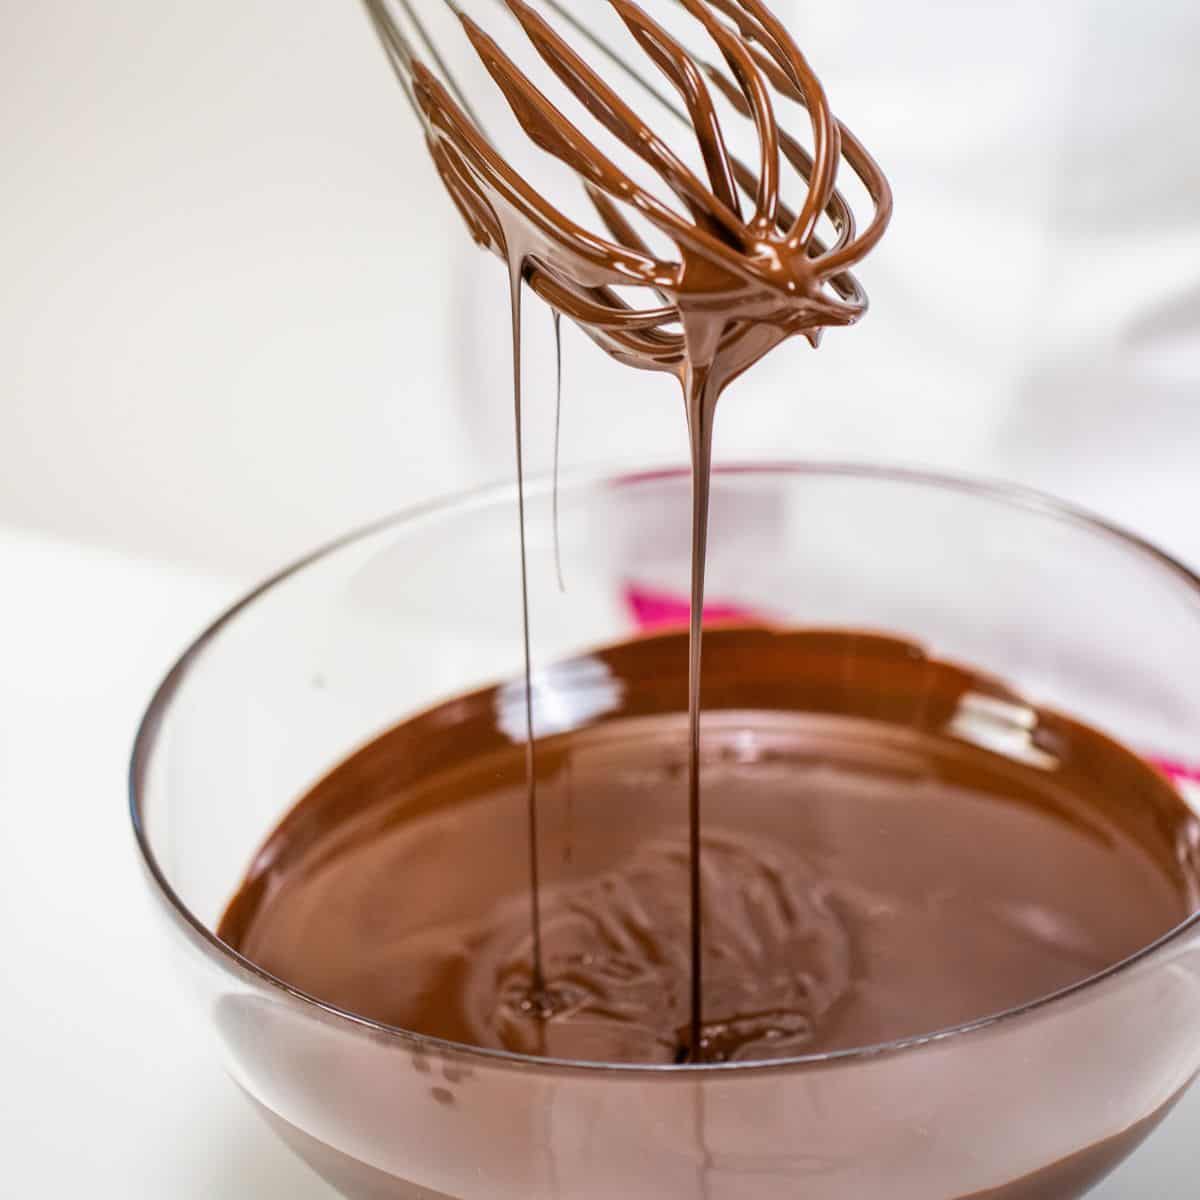 How to Temper Chocolate  Baking, Recipes and Tutorials - The Pink Whisk